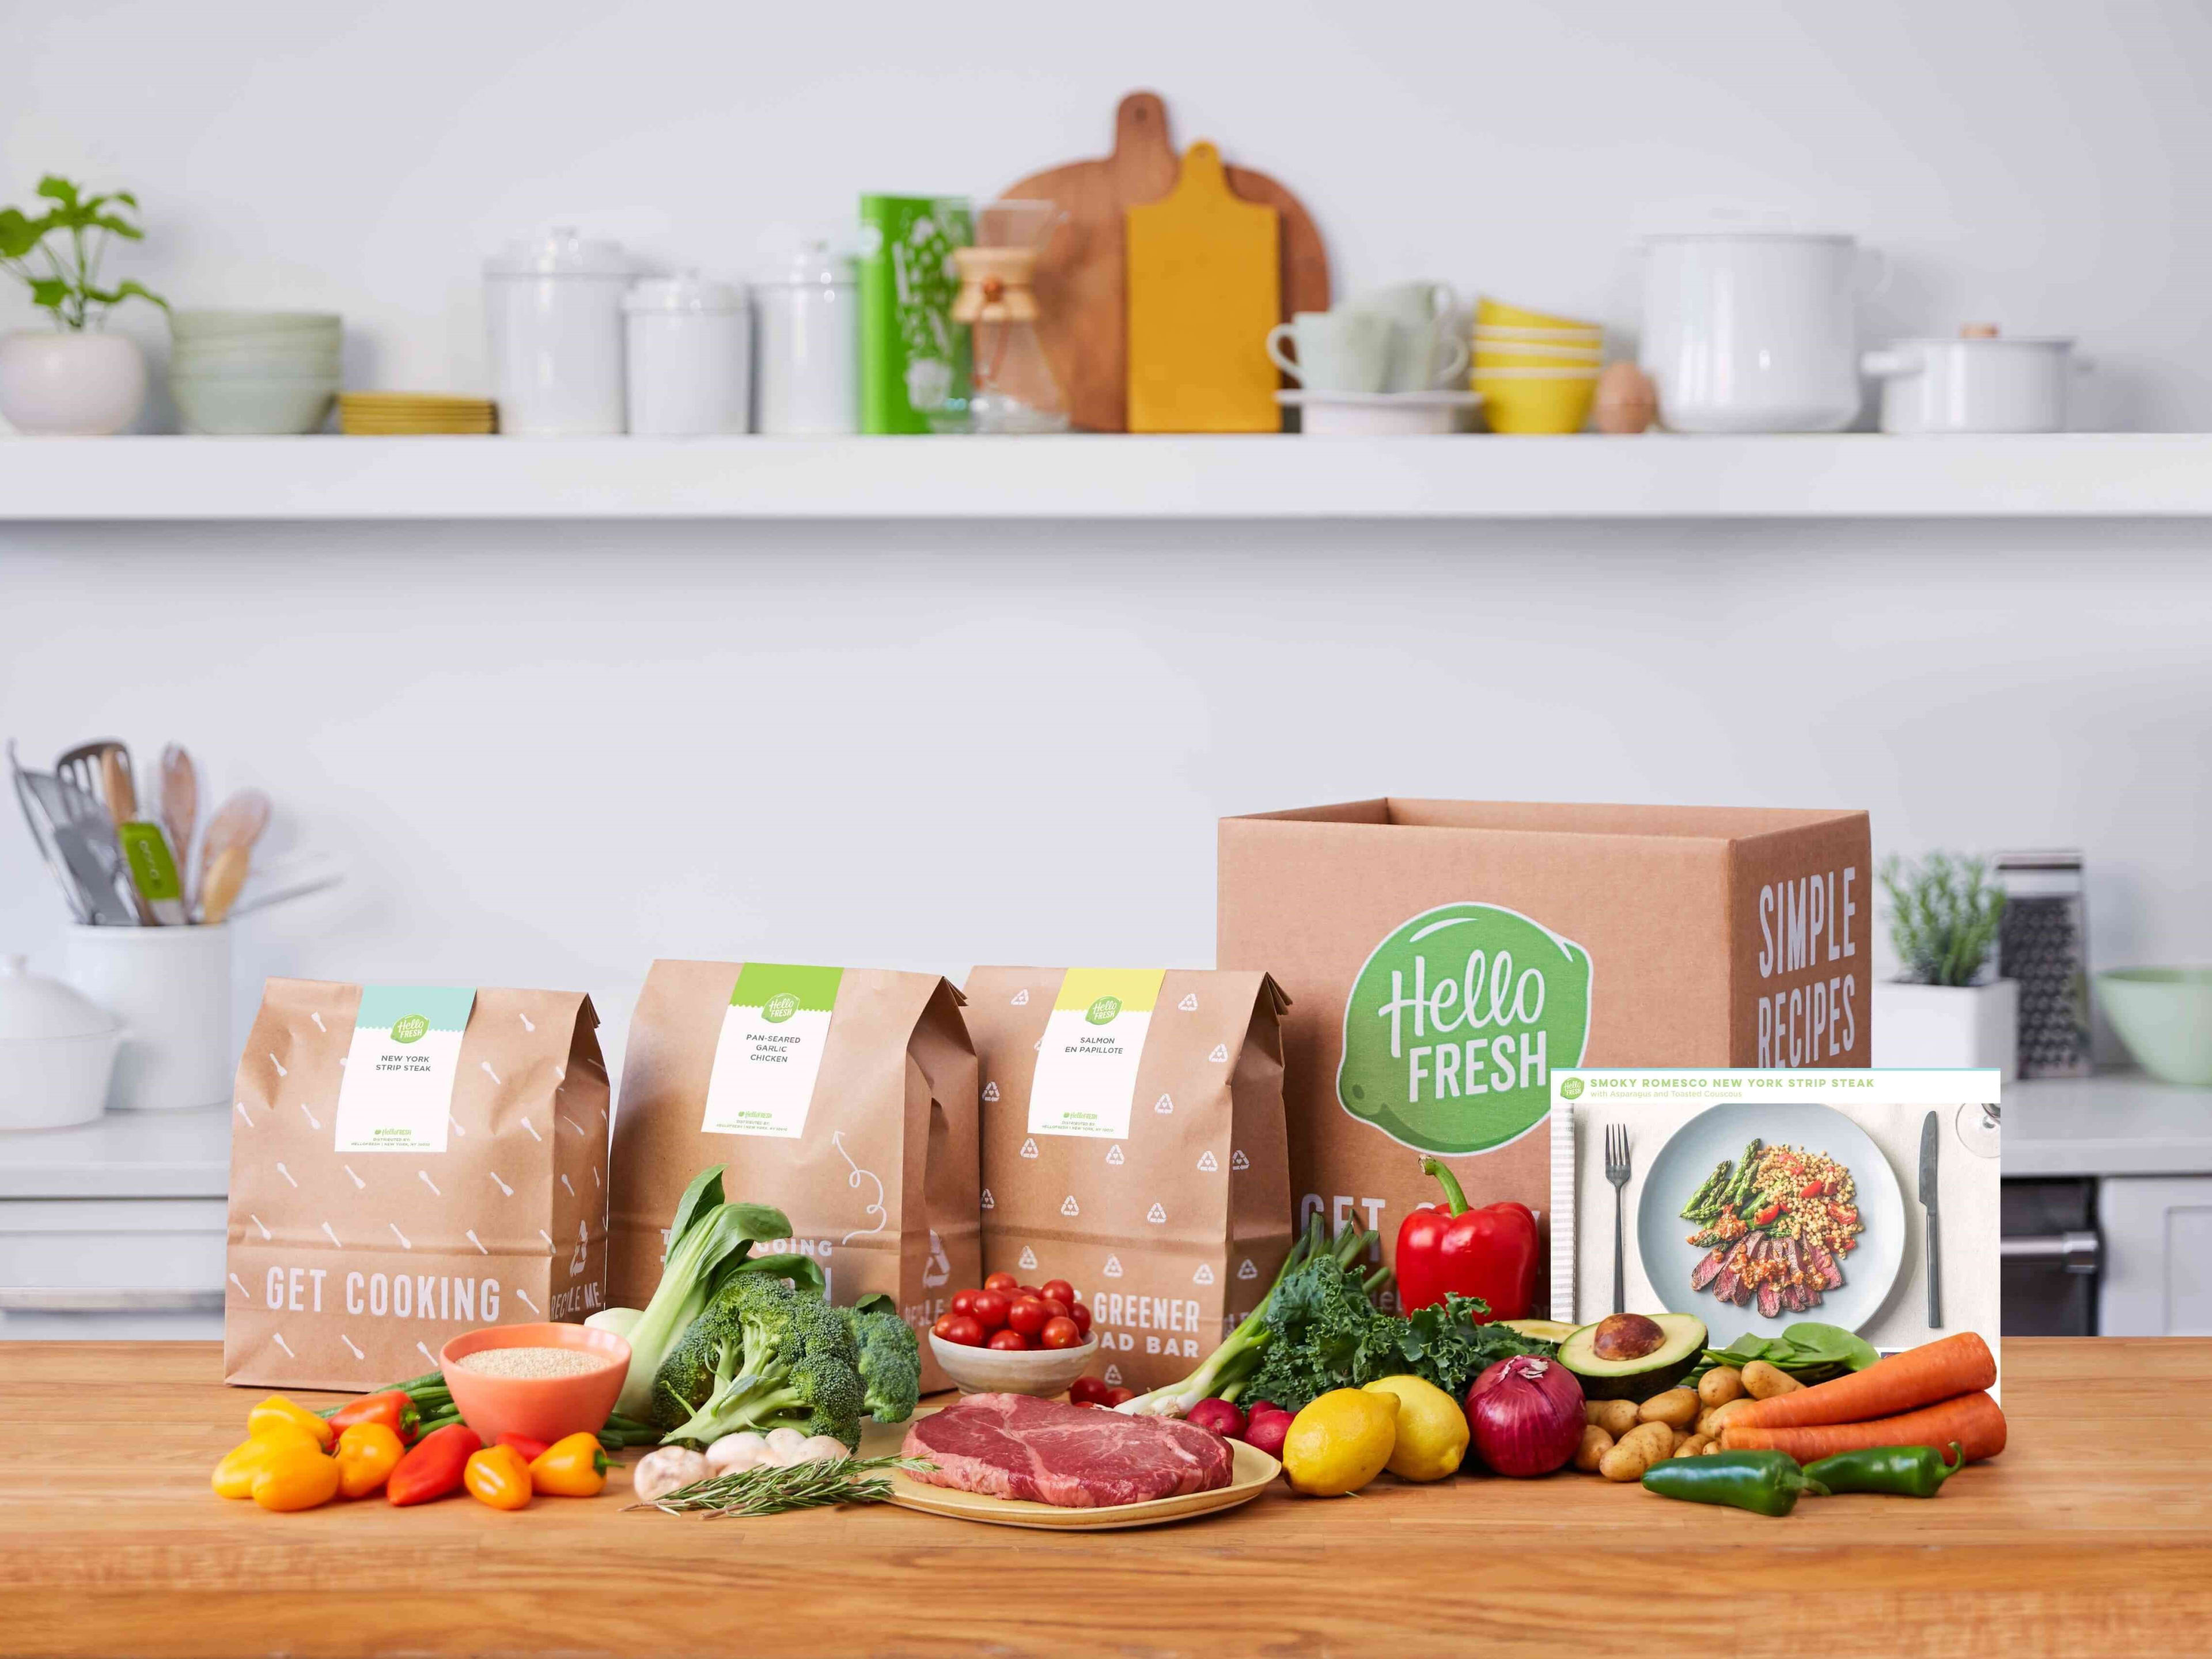 Meal Kit Delivery That Protects the Environment